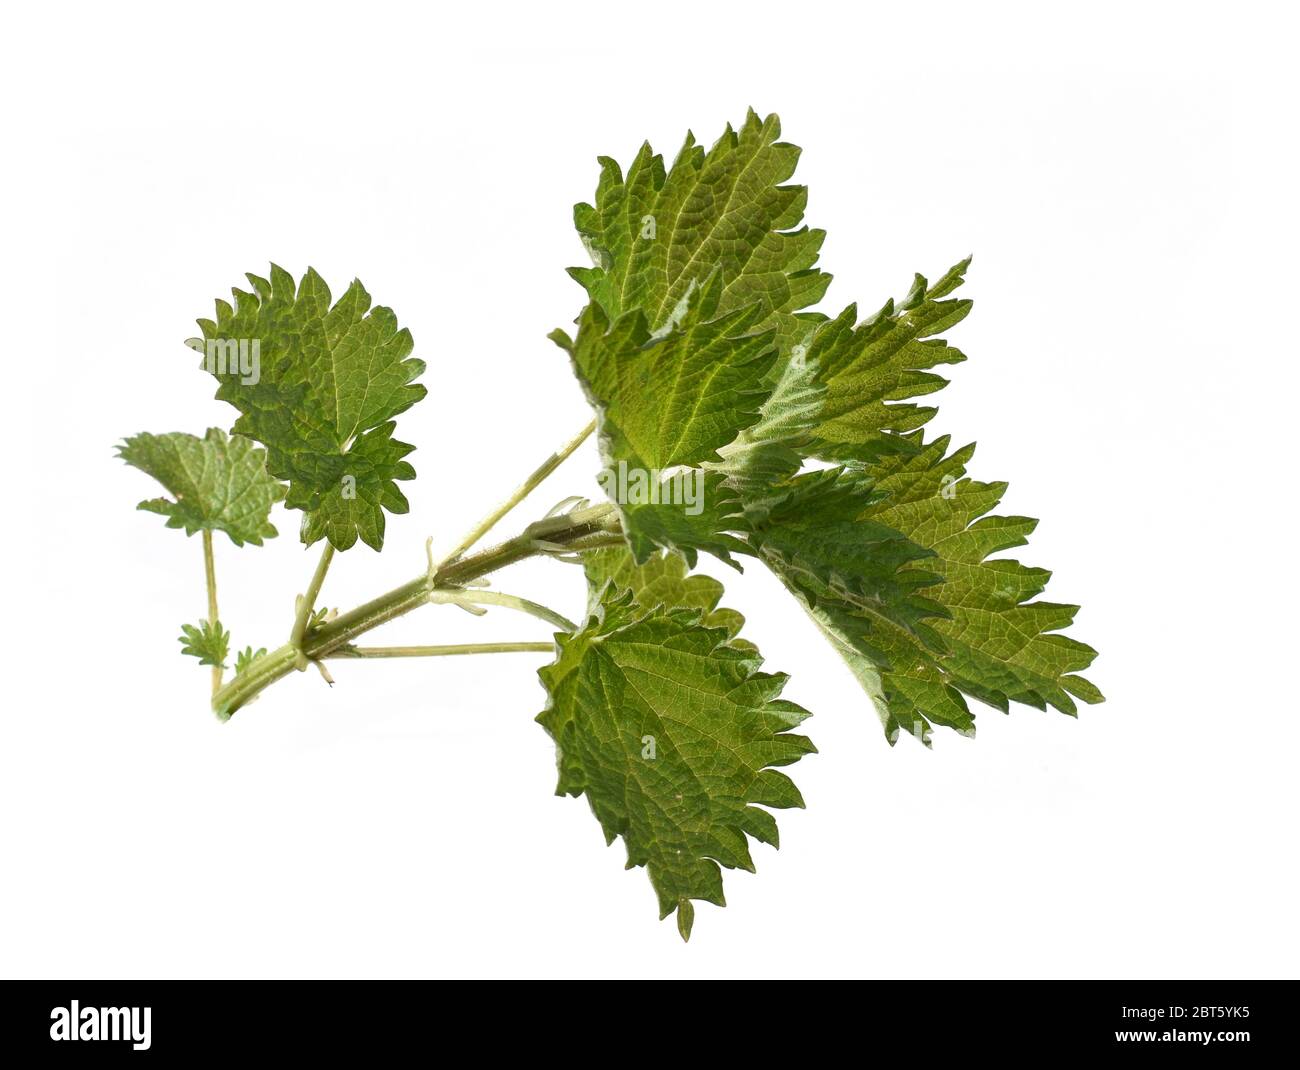 Stinging nettle plant Urtica dioica isolated on white background Stock Photo